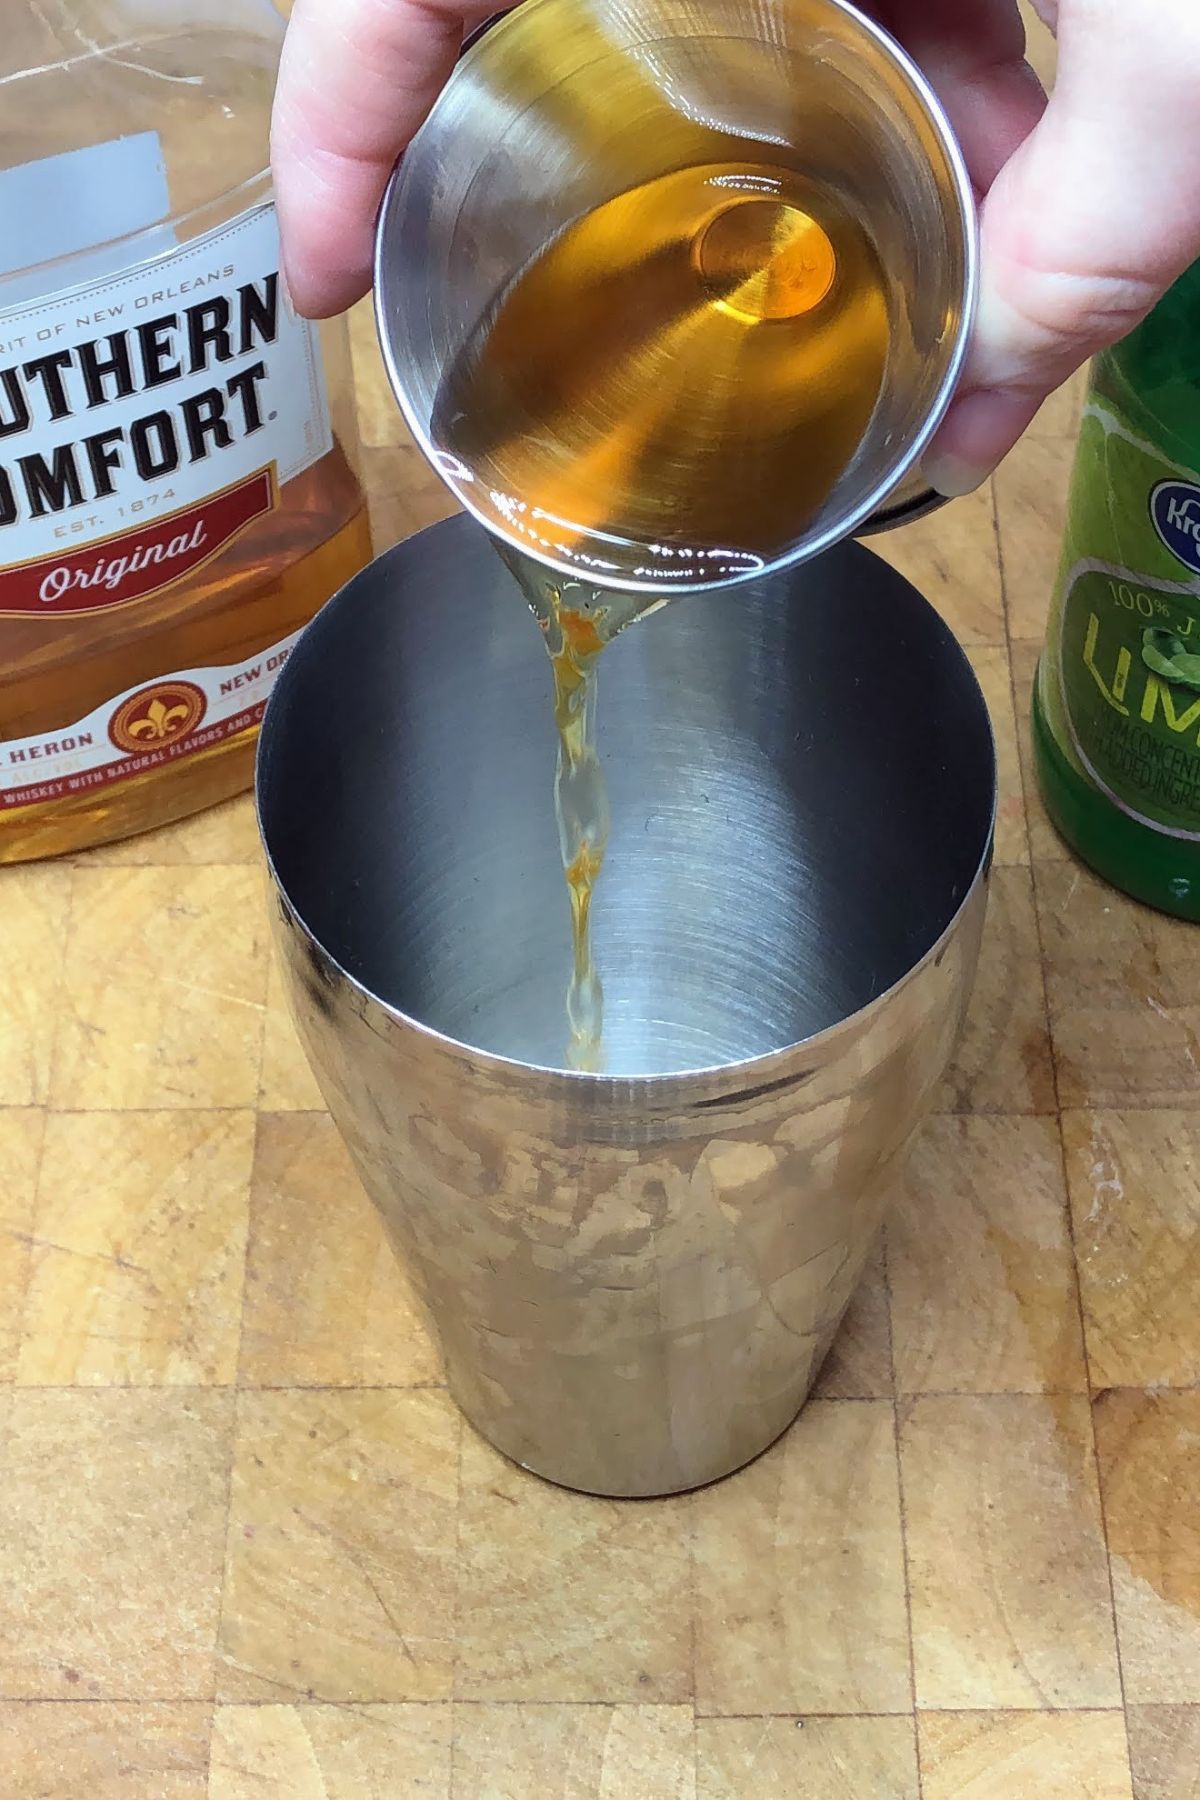 Pouring southern comfort from a jigger into a shaker.